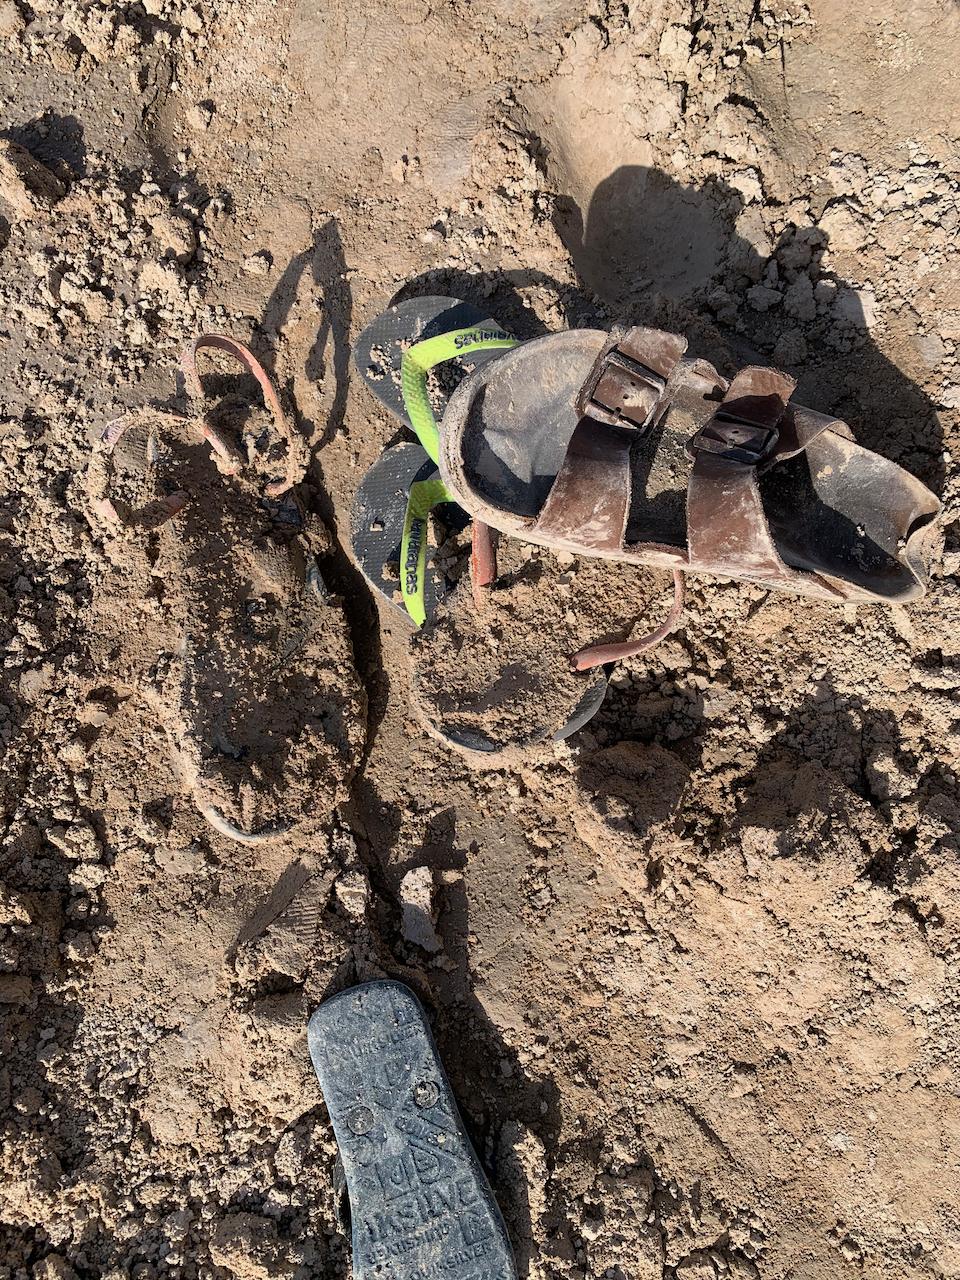 Sandals in the mud